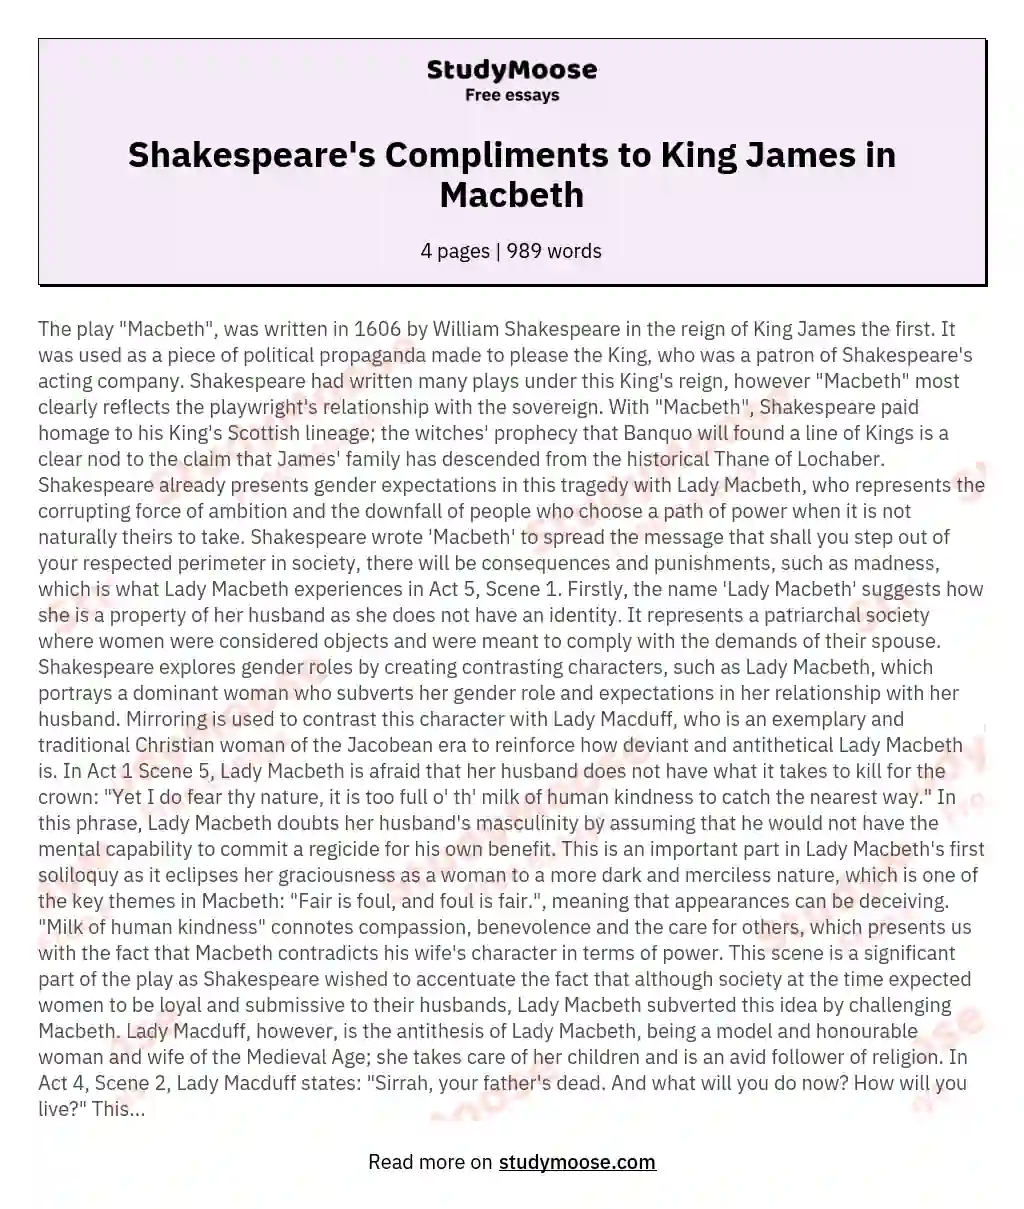 Shakespeare's Compliments to King James in Macbeth essay